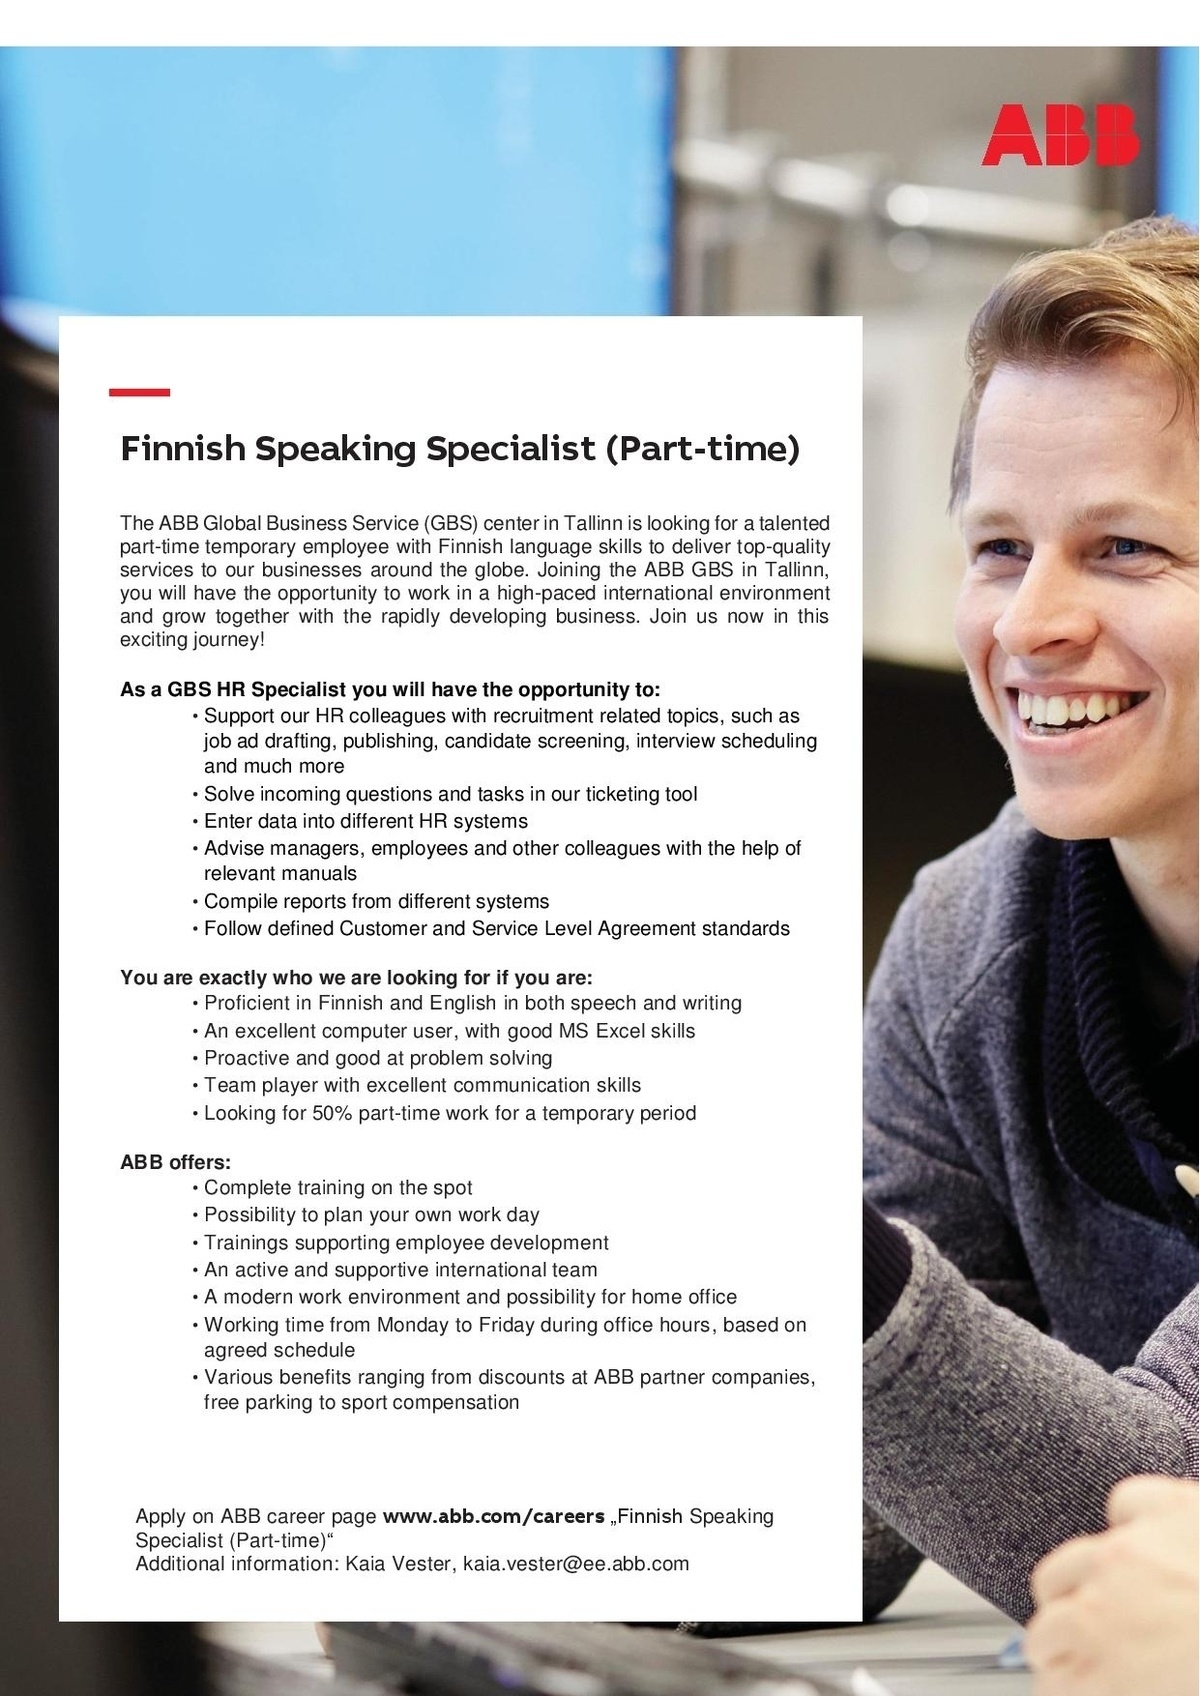 ABB AS Finnish Speaking Specialist (Part-time)